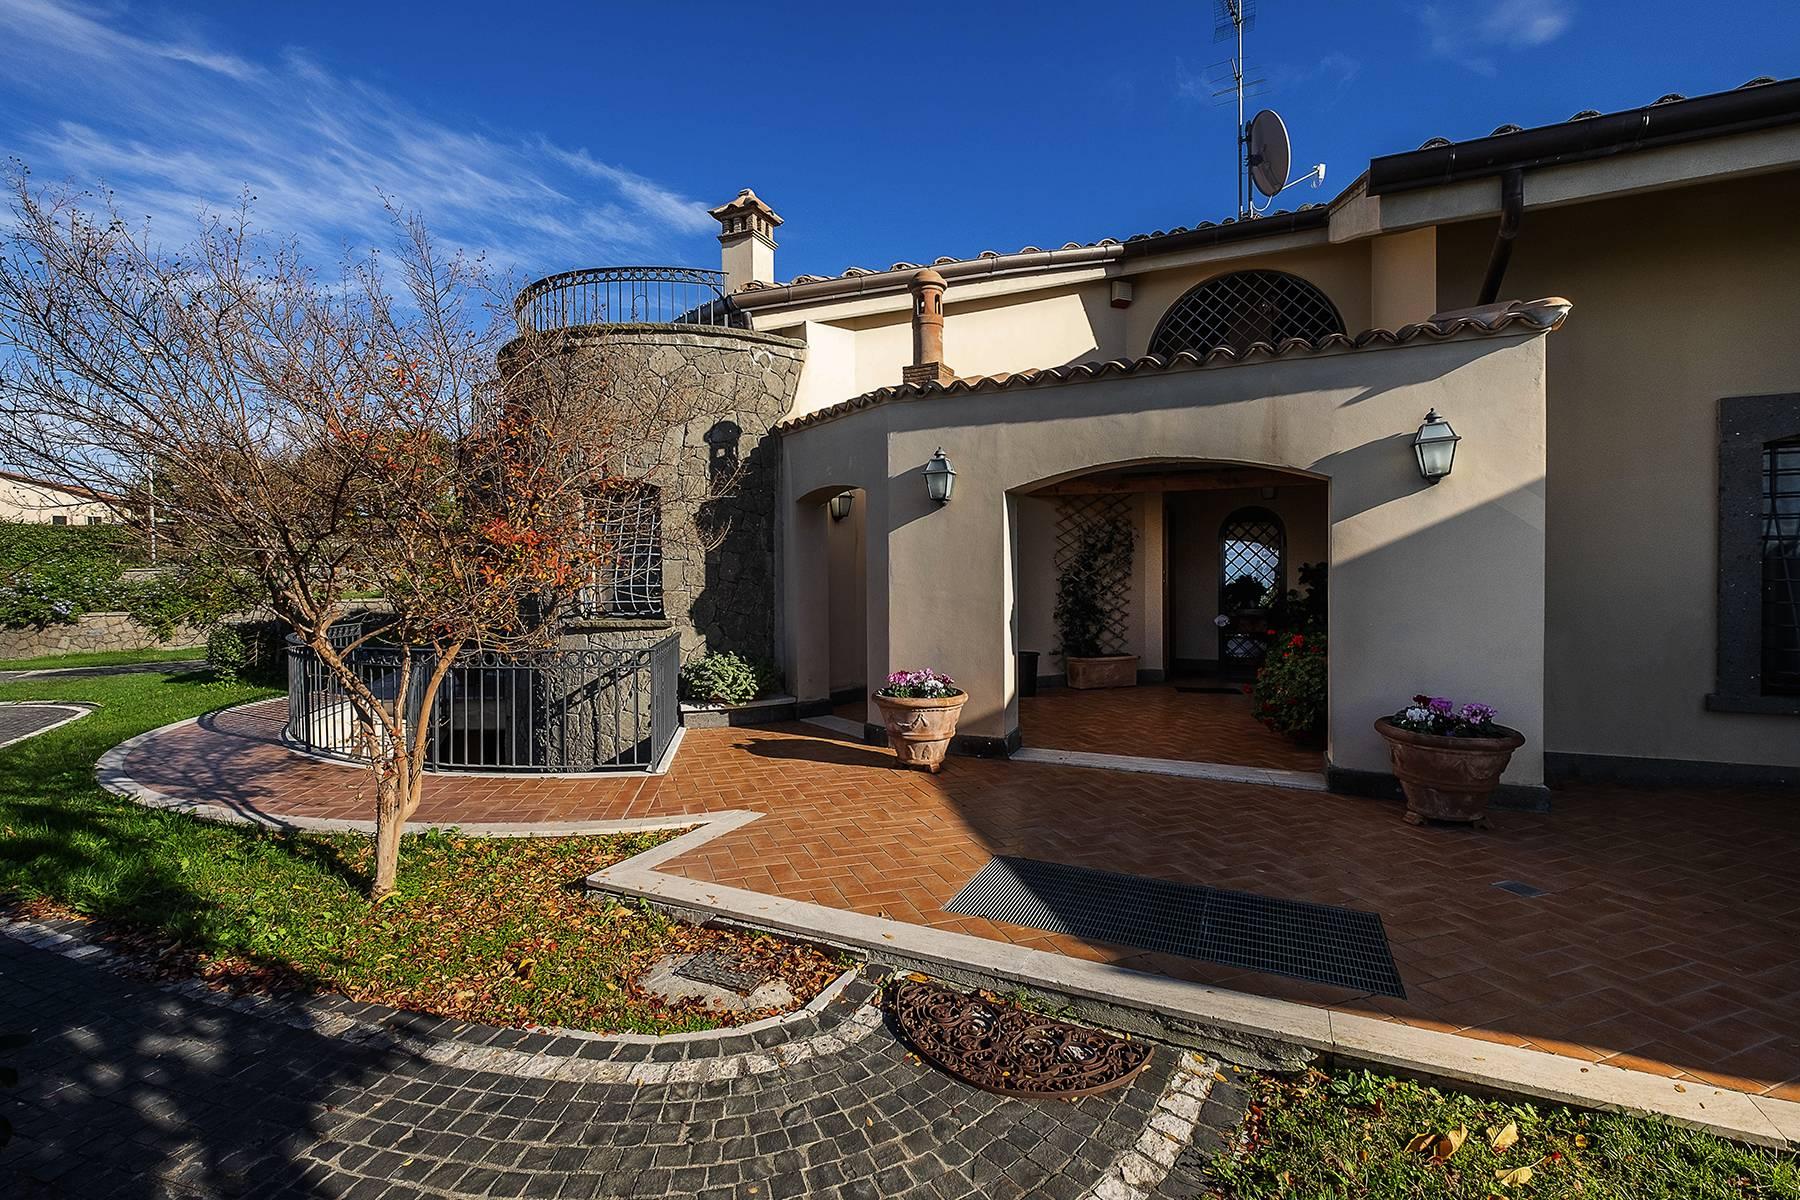 Villa in Frascati with a stunning view of the Eternal City - 20